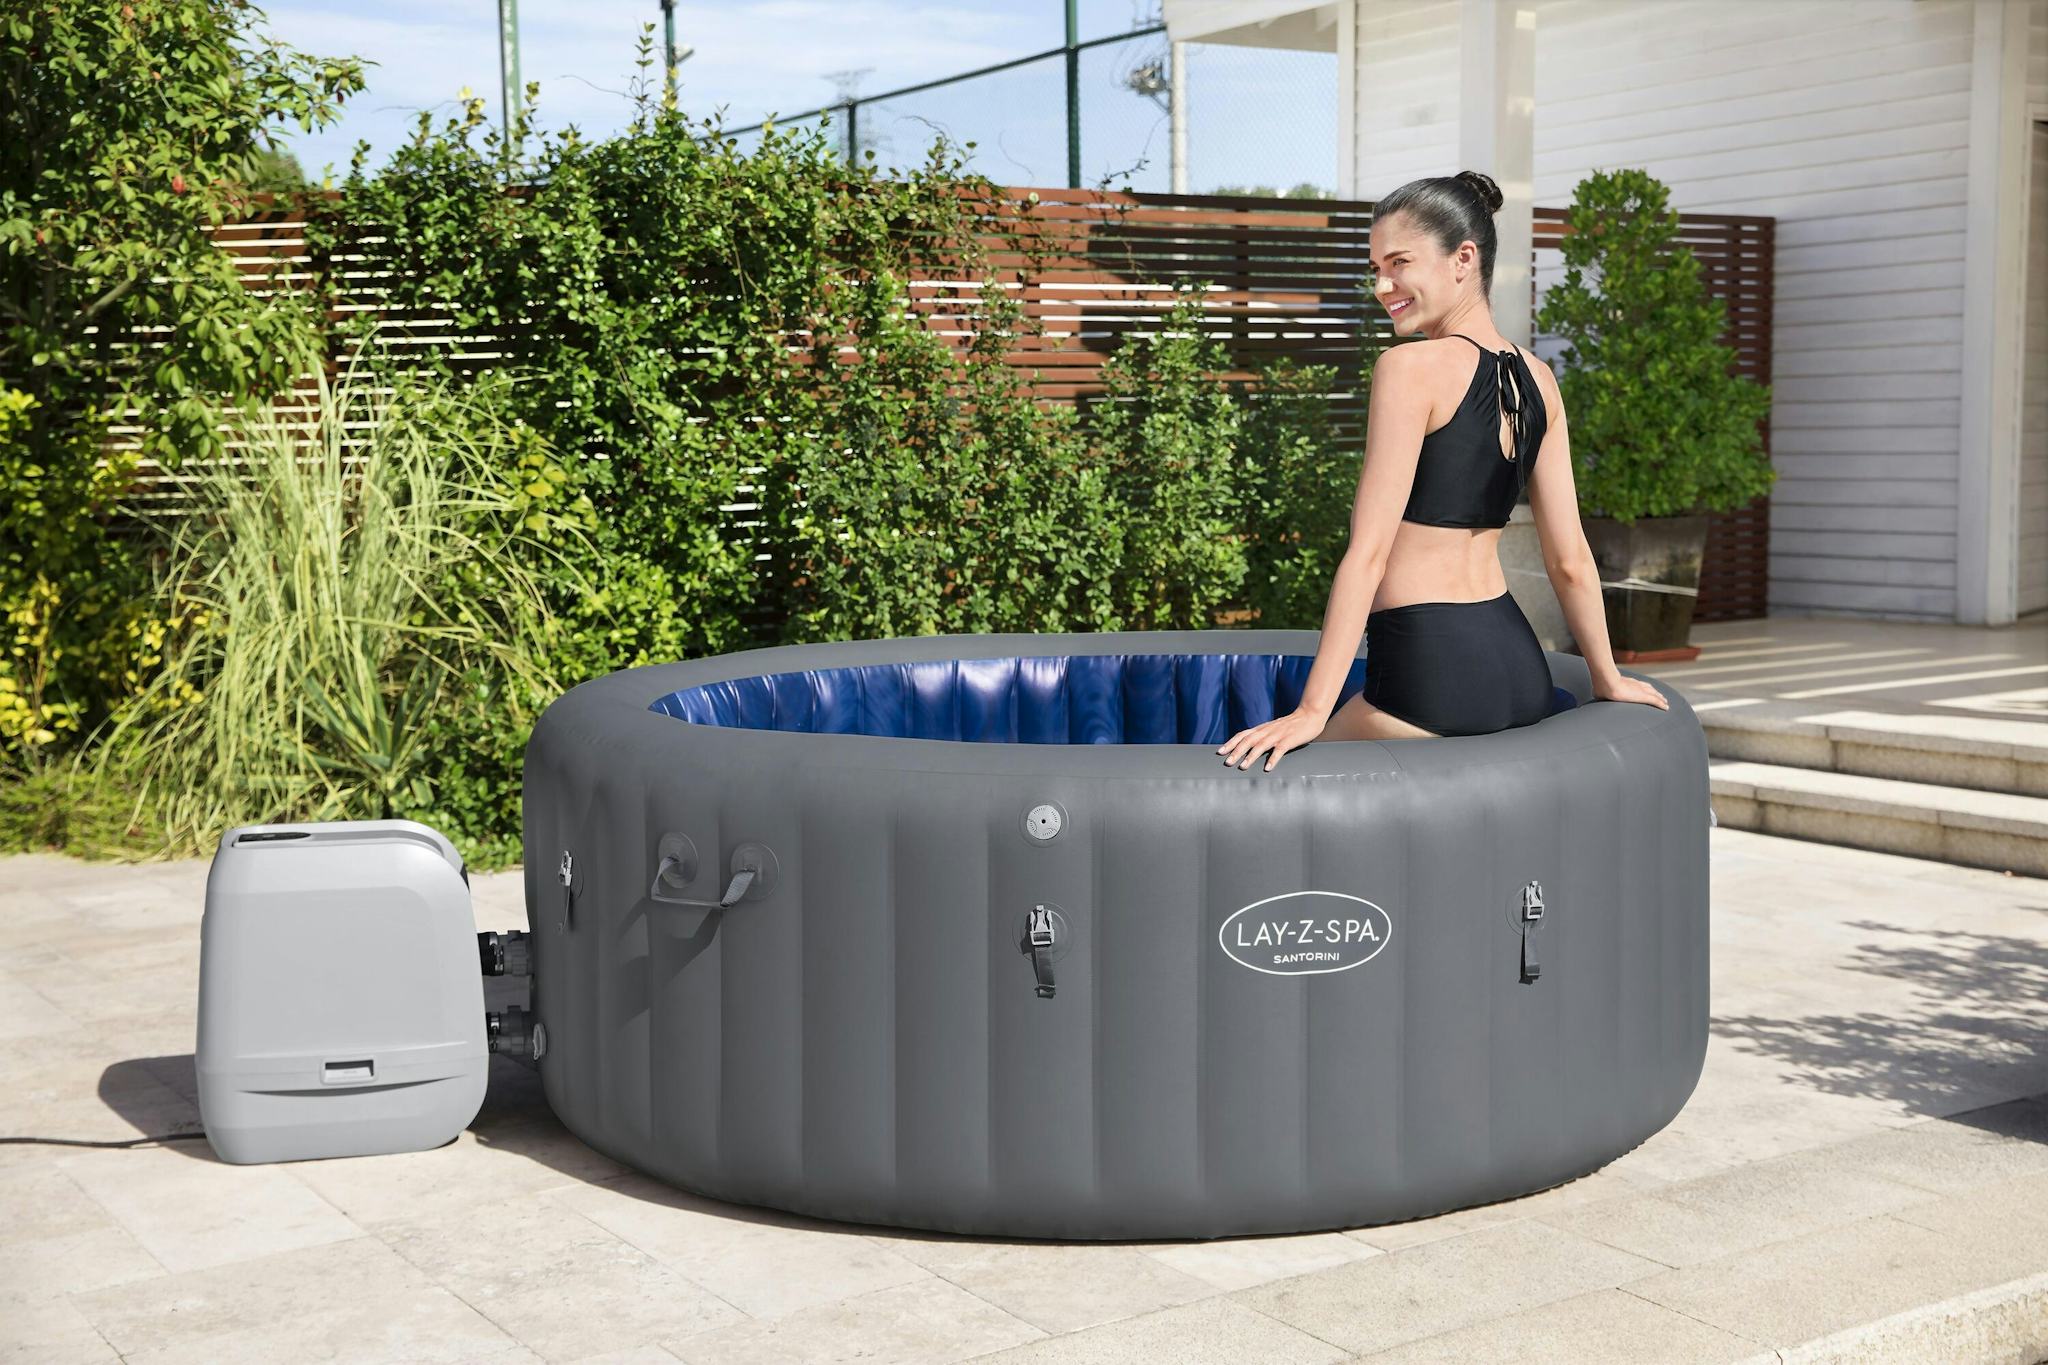 Spas Gonflables Spa gonflable rond Lay-Z-Spa Santorini Hydrojet pro™ 5 - 7 personnes Bestway 6